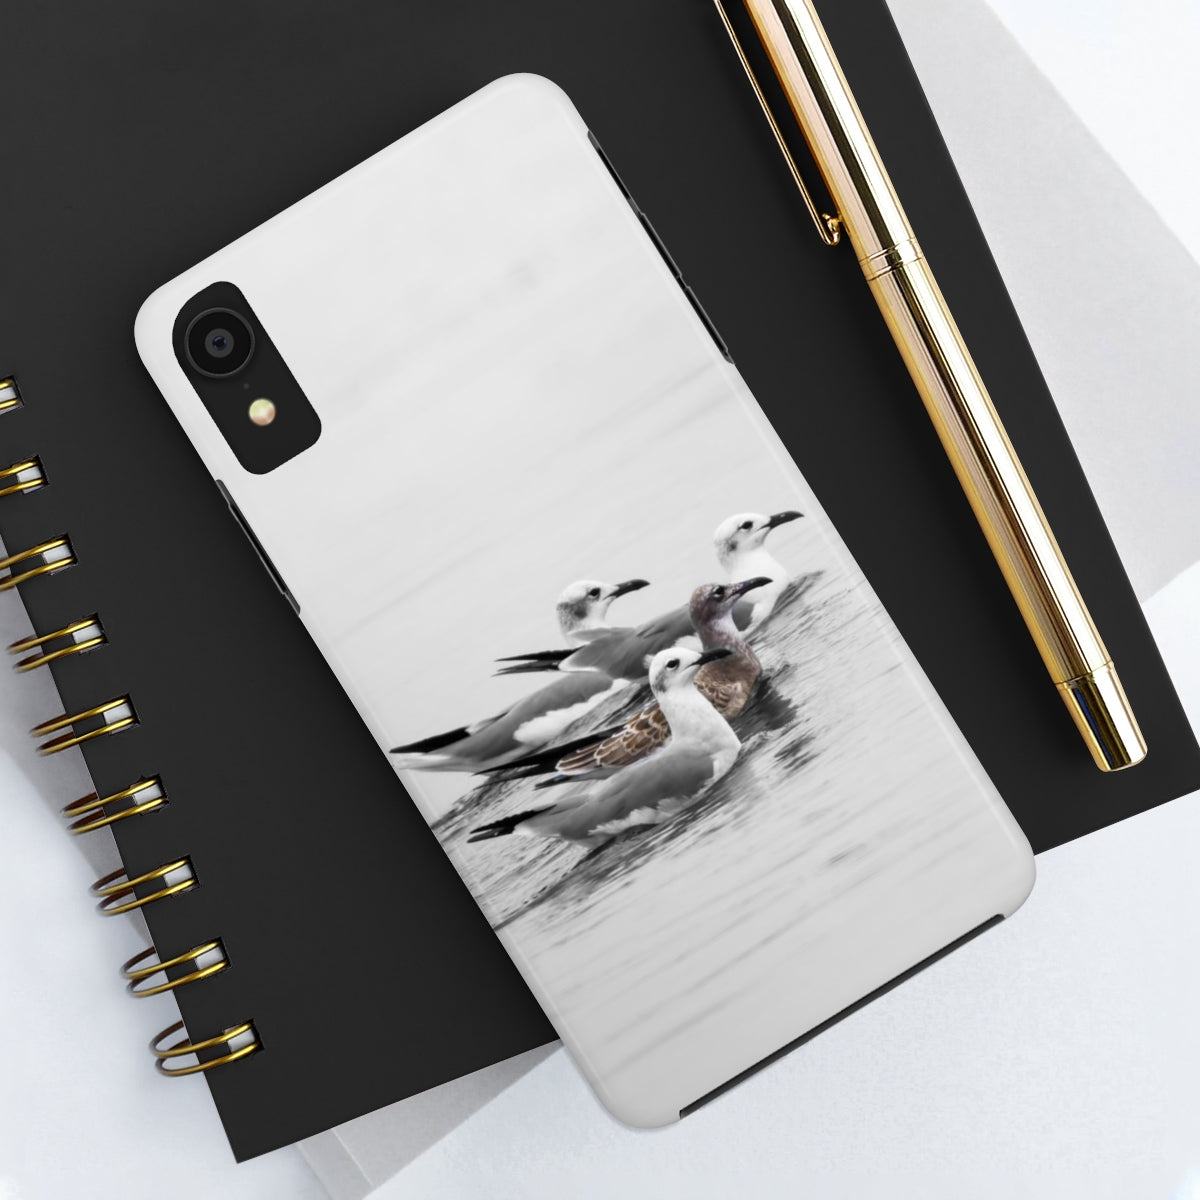 A Flock of Seagulls Tough Phone Cases, Case-Mate